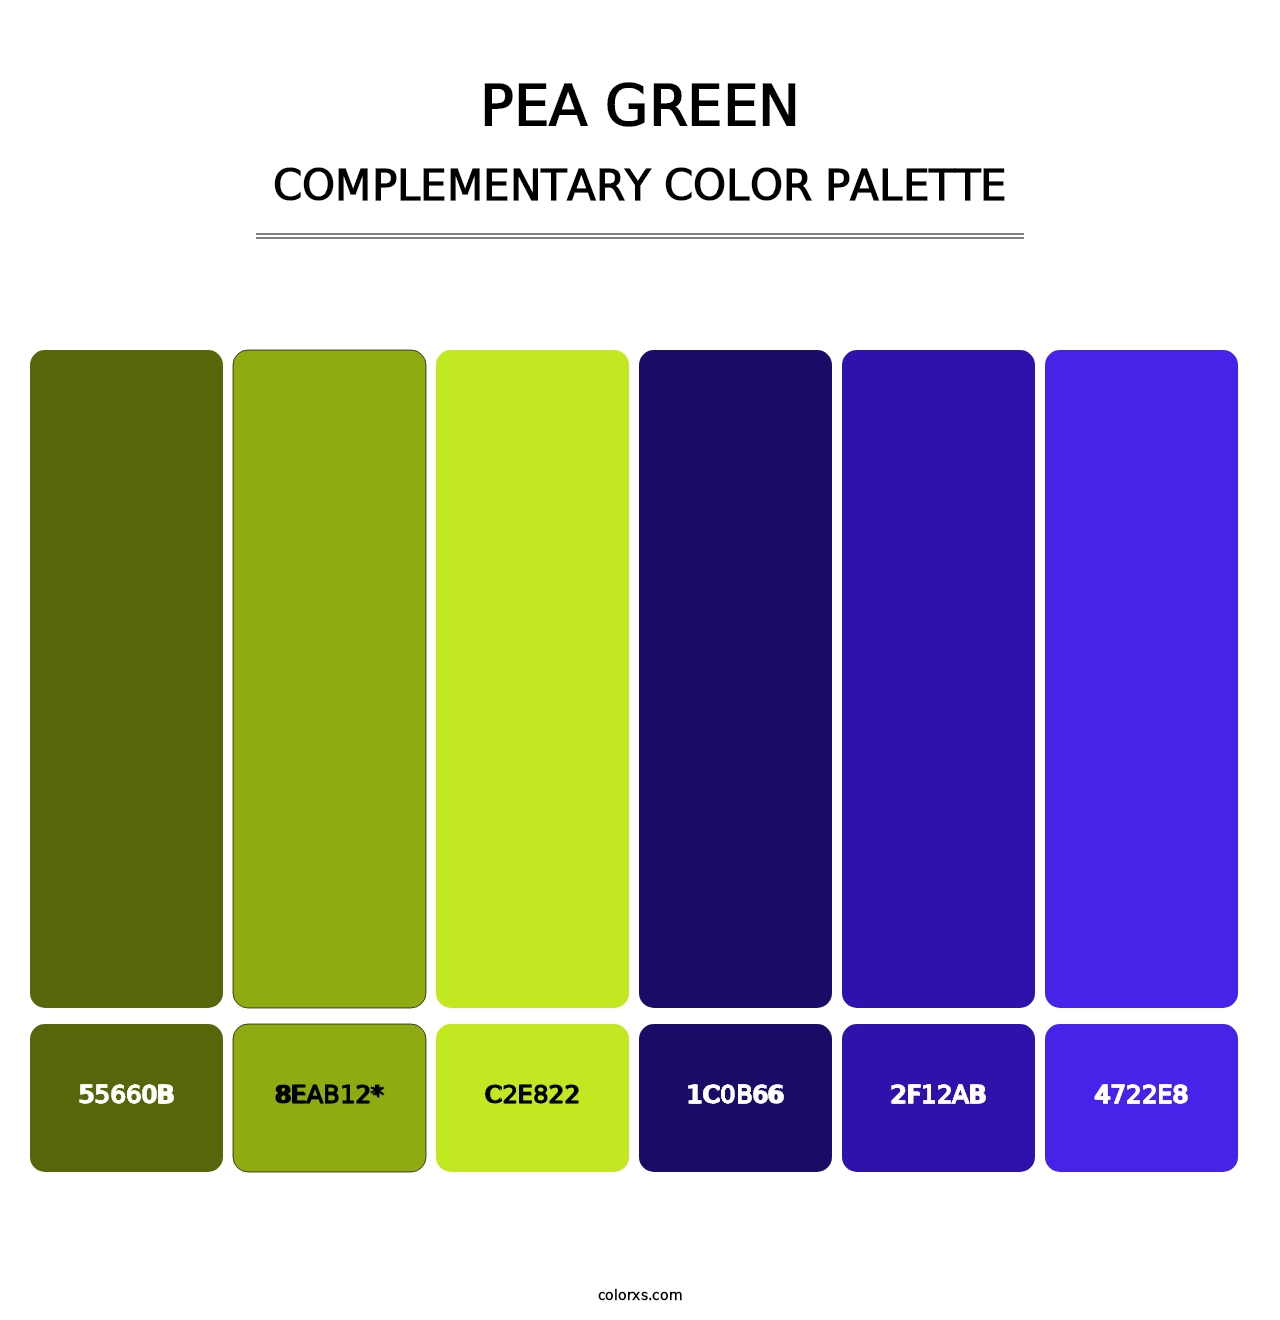 Pea Green - Complementary Color Palette